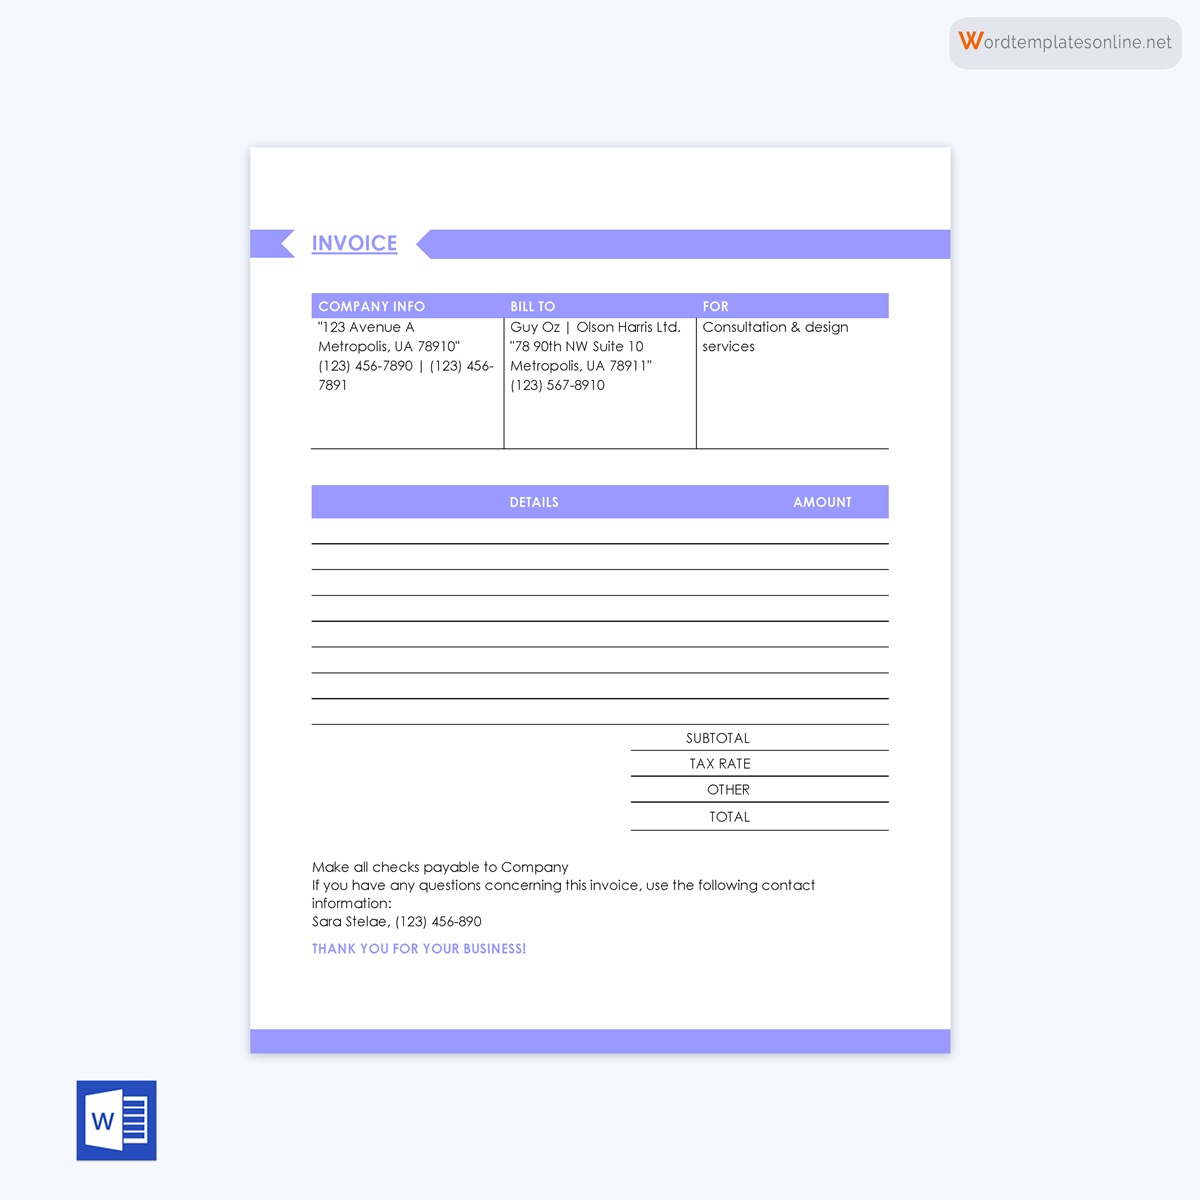 Blank invoice template Excel
